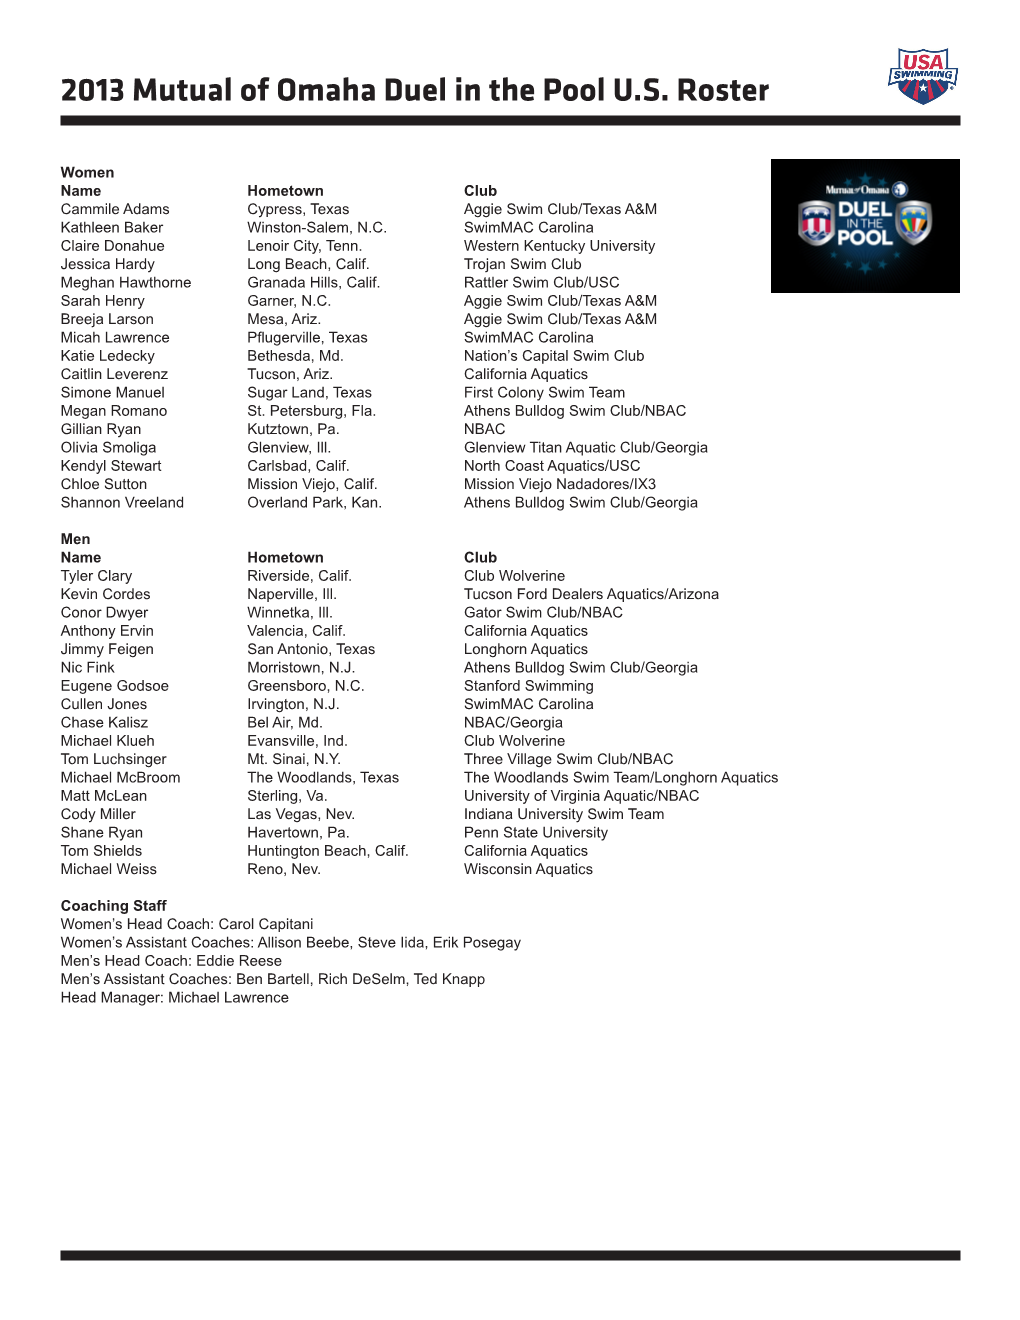 2013 Mutual of Omaha Duel in the Pool U.S. Roster